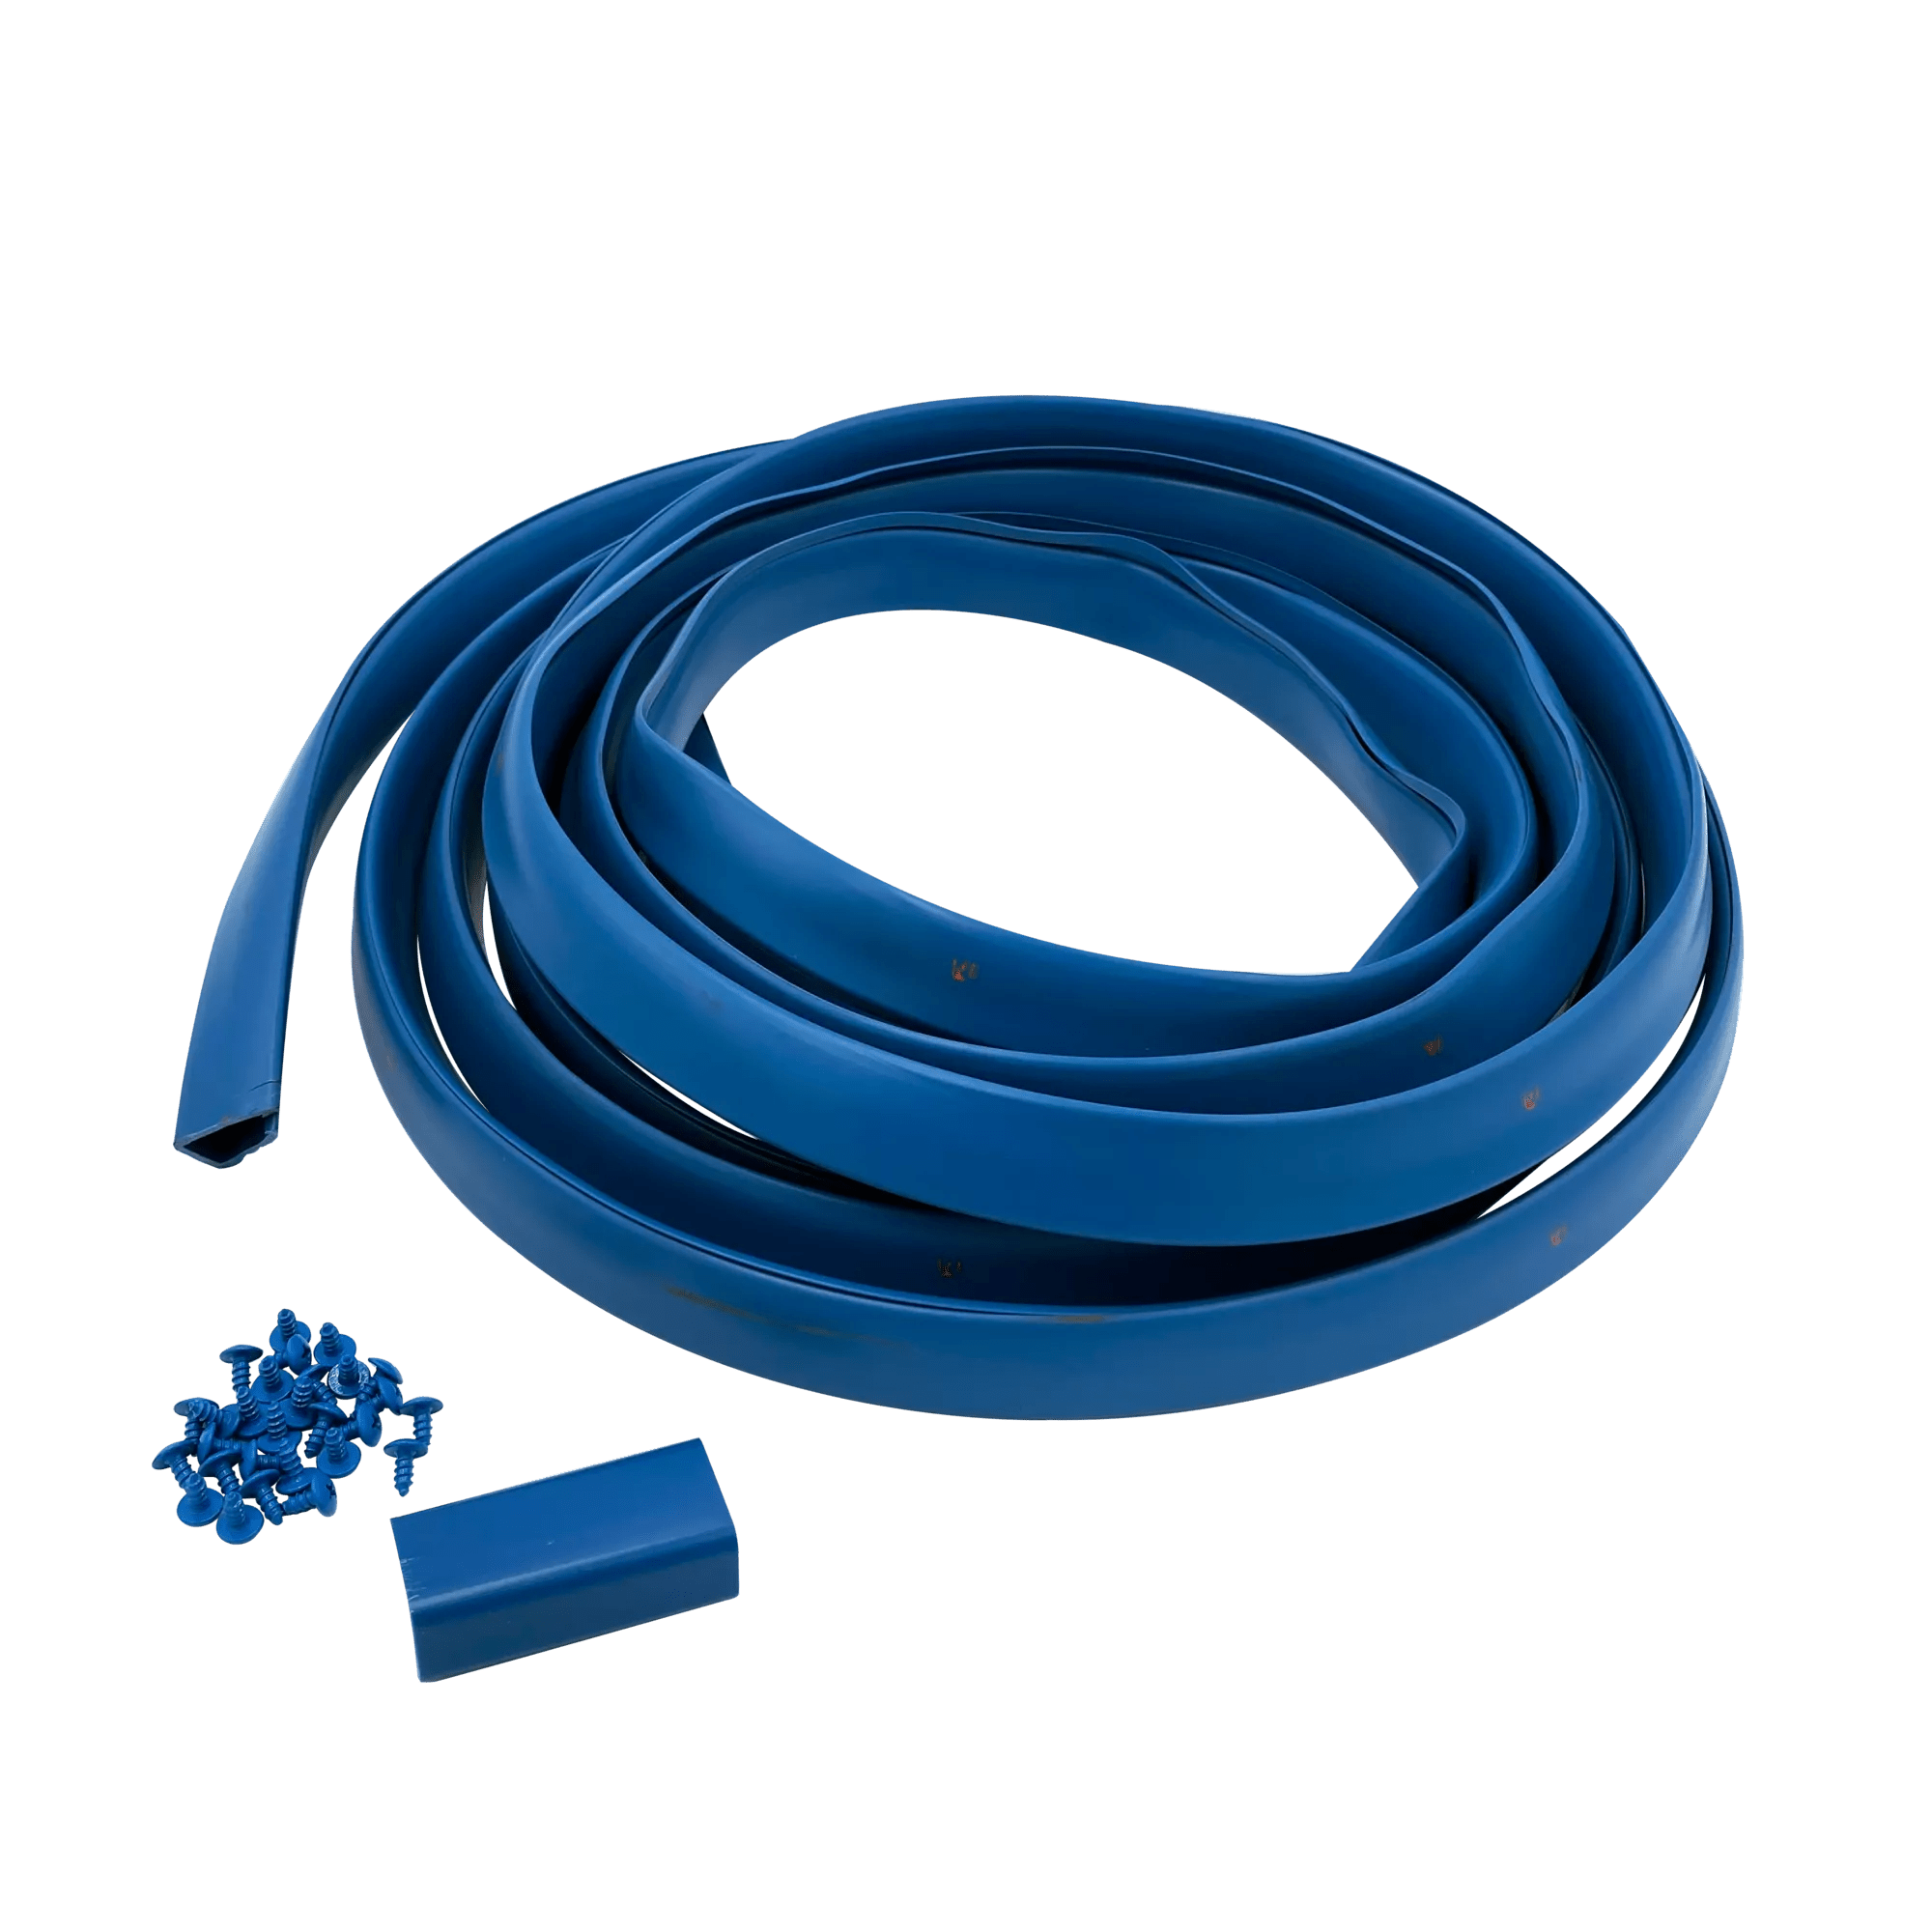 PELICAN - Contour Molding Kit in Azure Blue -  - PS0262-22 - ISO